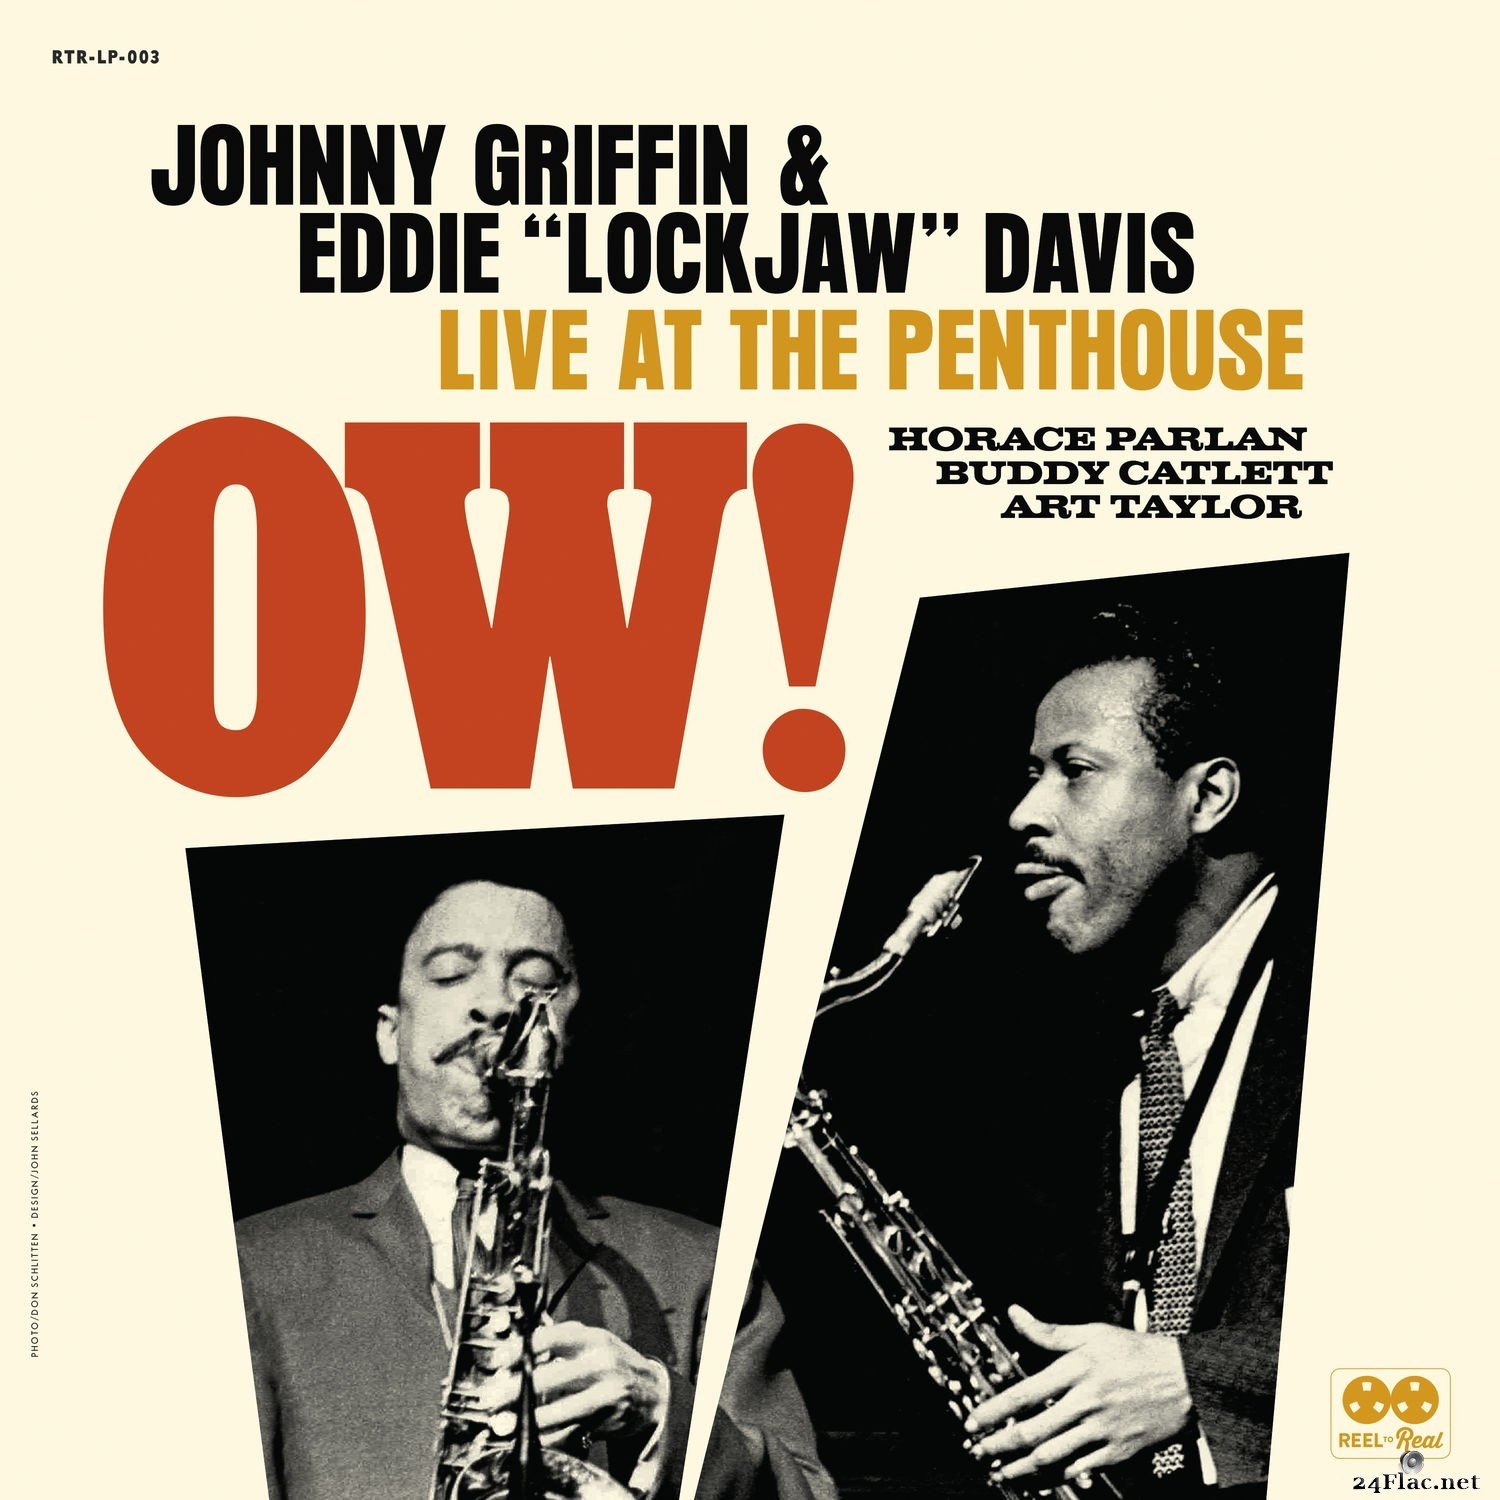 Eddie "Lockjaw" Davis & Johnny Griffin - Ow! Live at the Penthouse (2021) Hi-Res